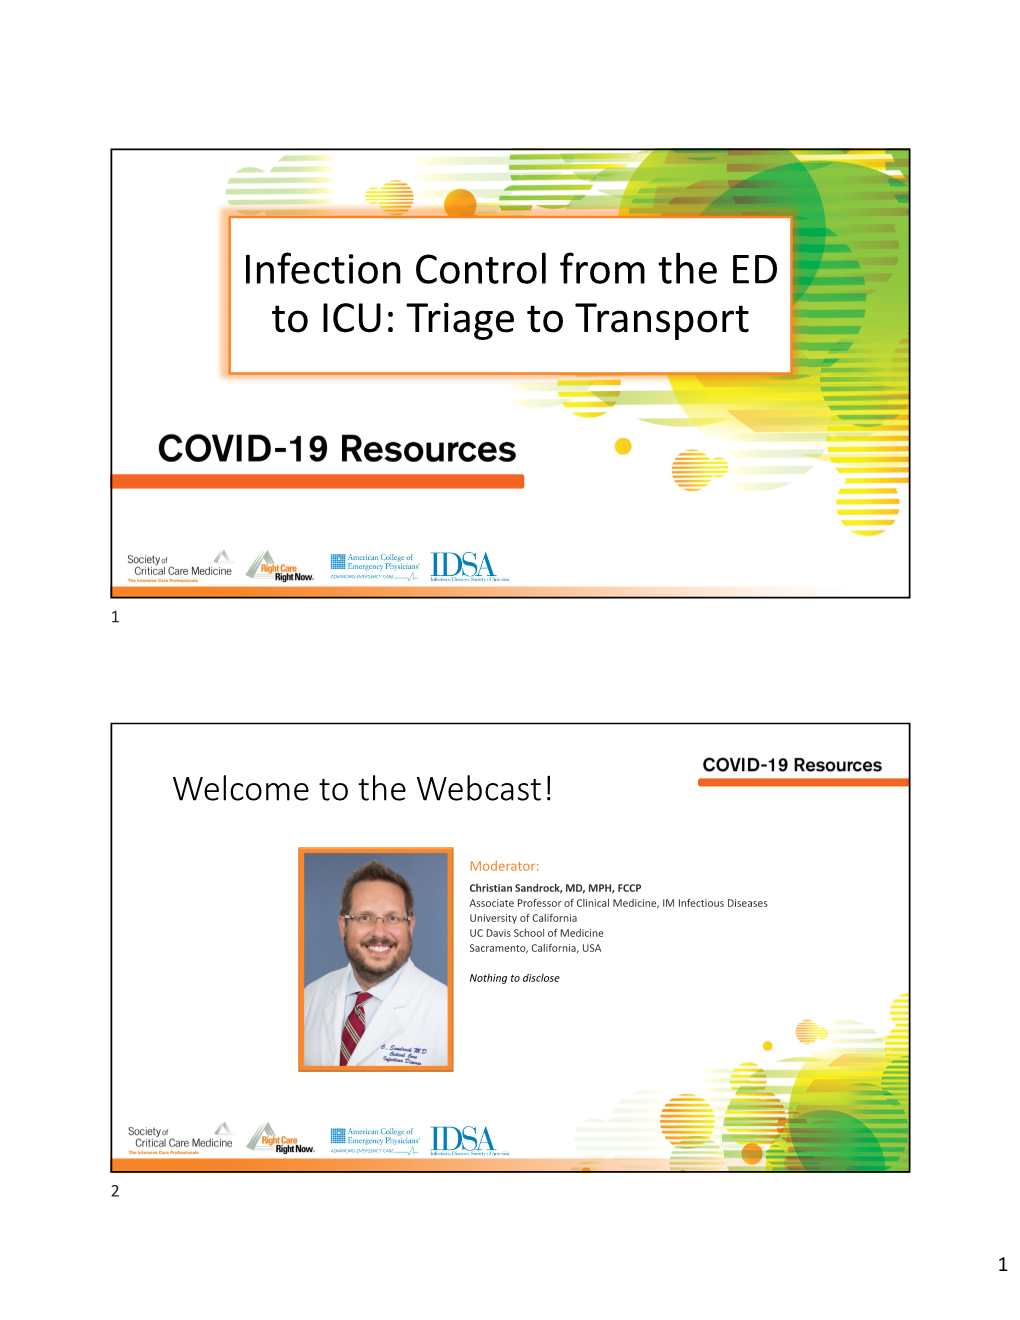 Infection Control from the ED to ICU: Triage to Transport